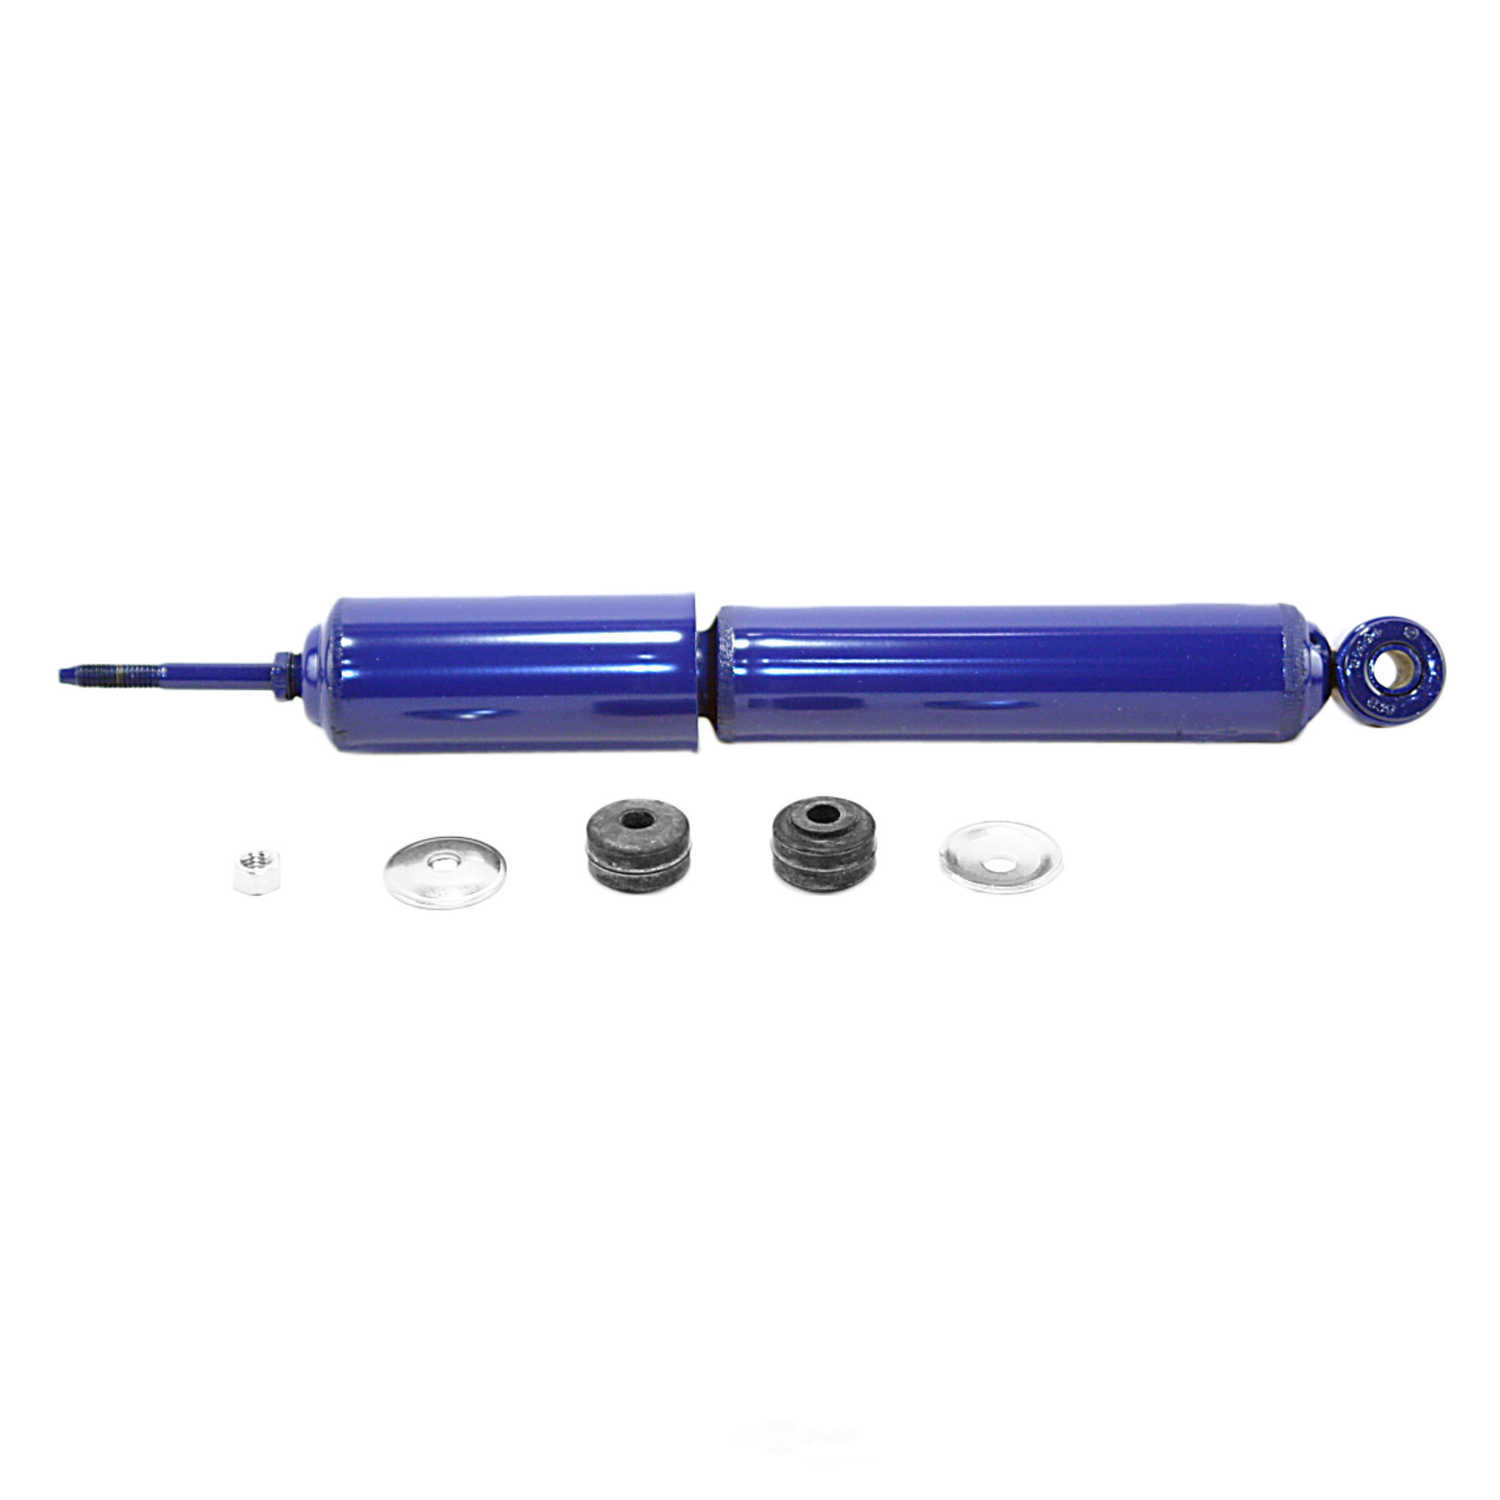 MONROE SHOCKS/STRUTS - Monro-Matic Plus Shock Absorber (With ABS Brakes, Front) - MOE 32280